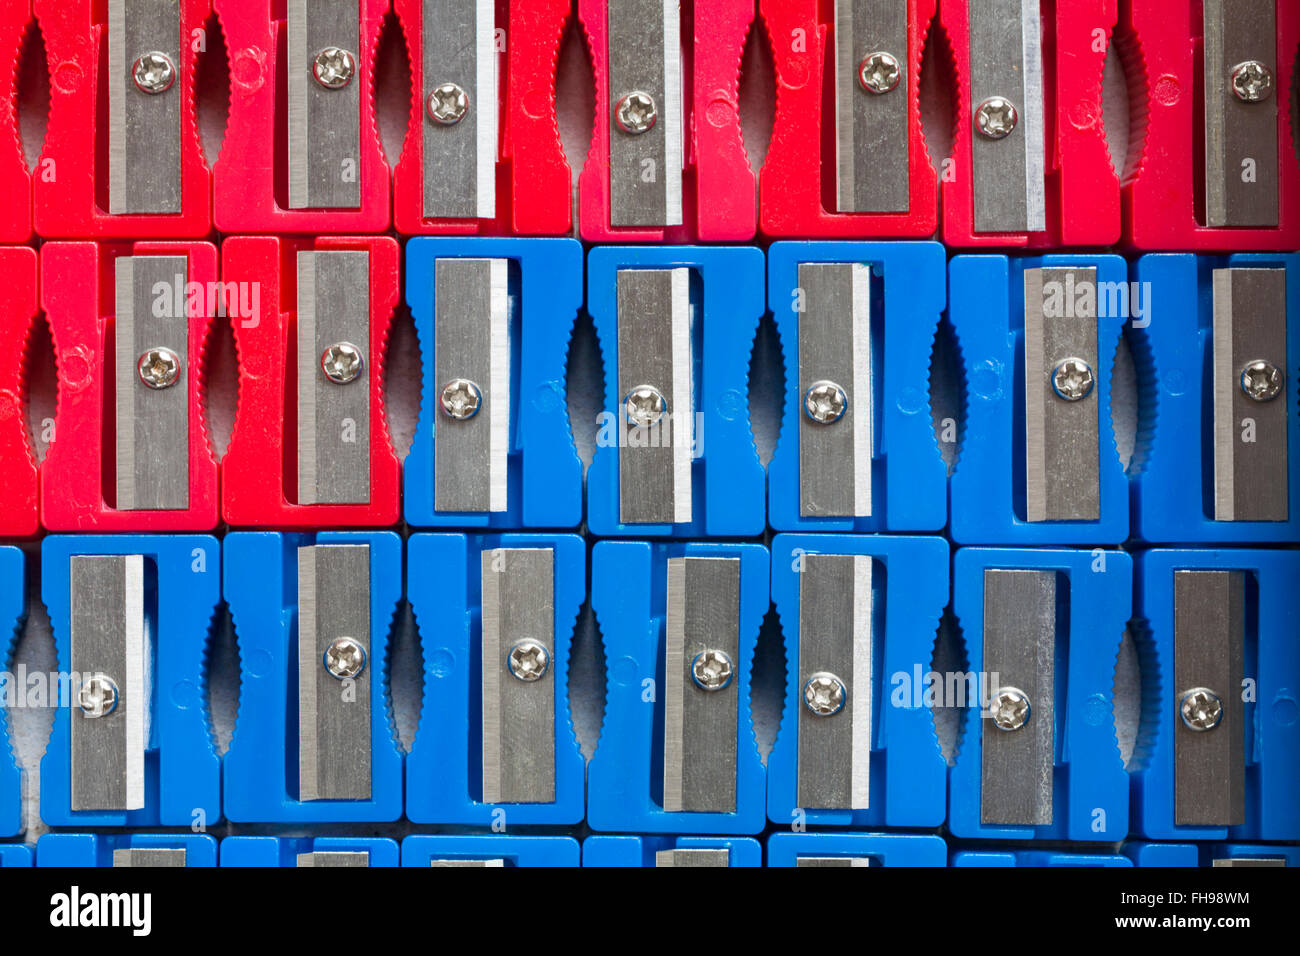 Rows of red and blue plastic pencil sharpeners Stock Photo